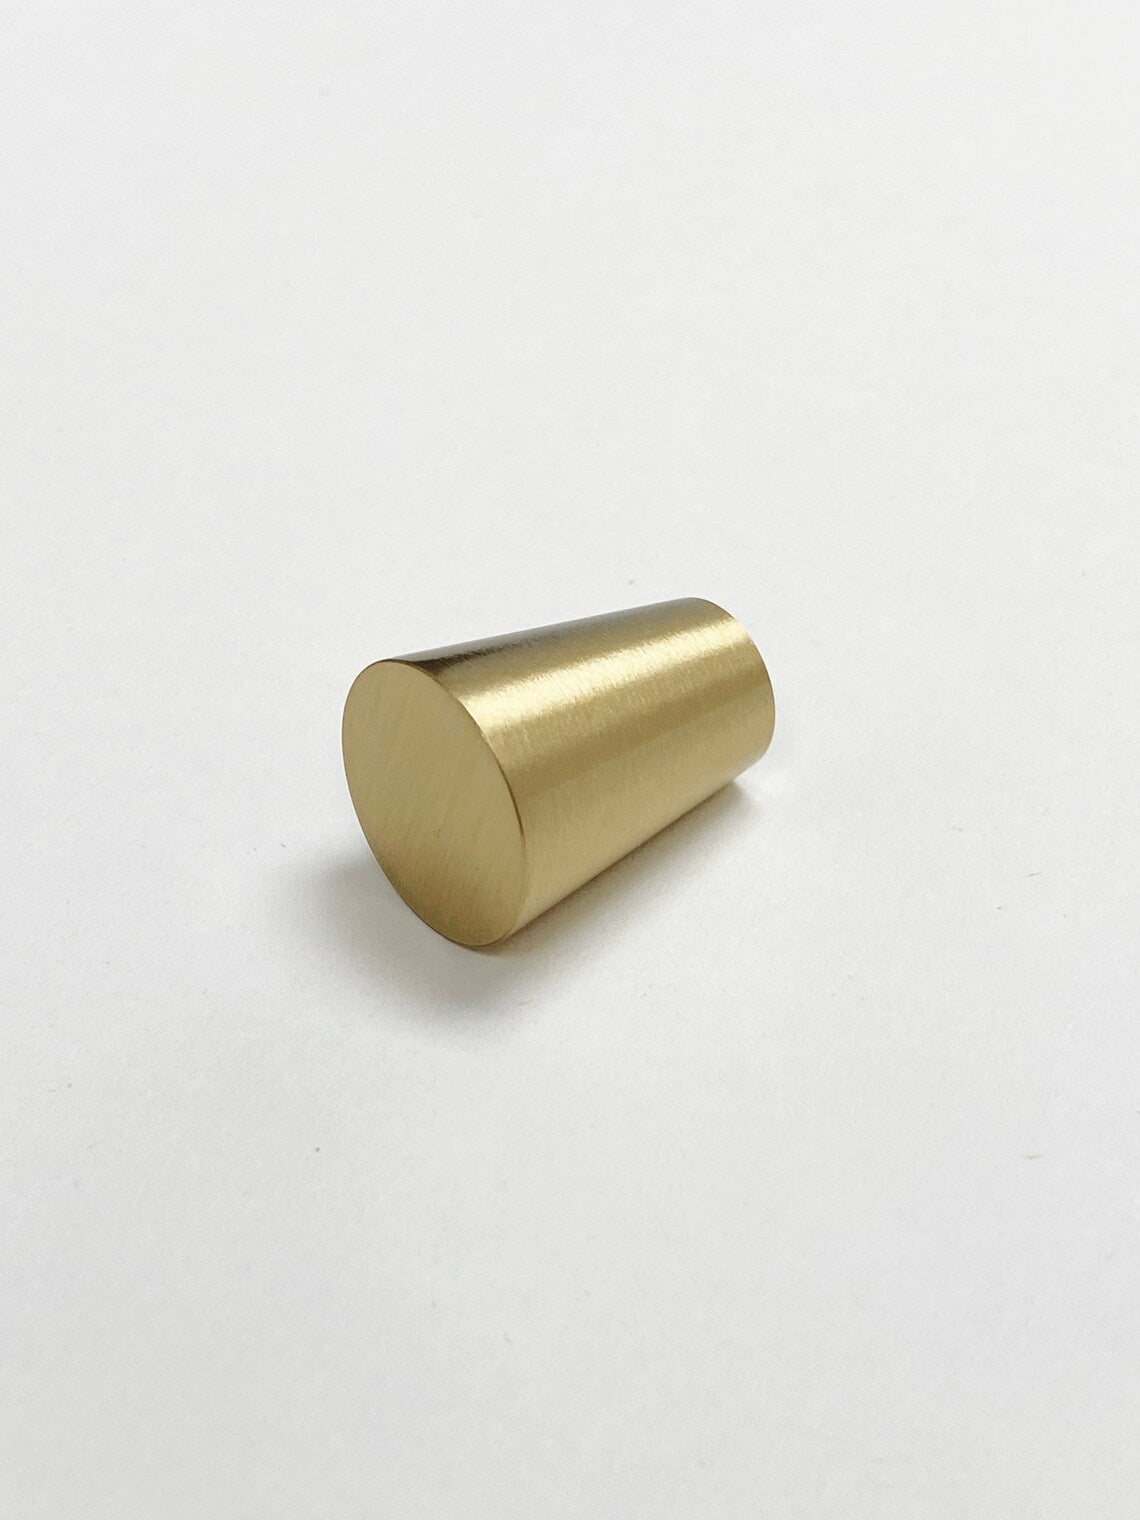 Brushed Brass "Charlie" Drawer Pulls and Cabinet Knobs - Forge Hardware Studio